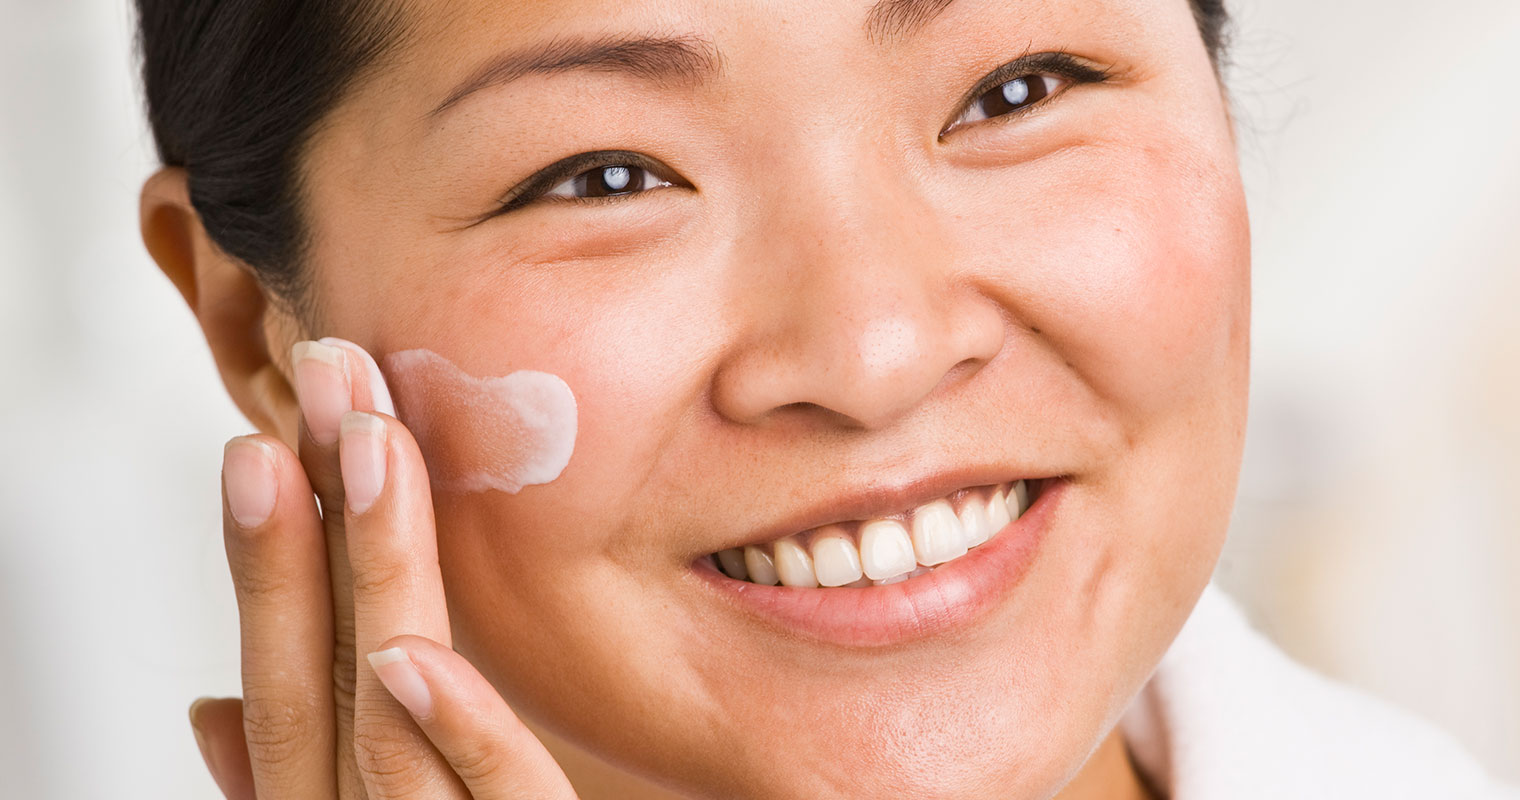 use of hydroquinone cream may reduce appearance of hyperpigmentation